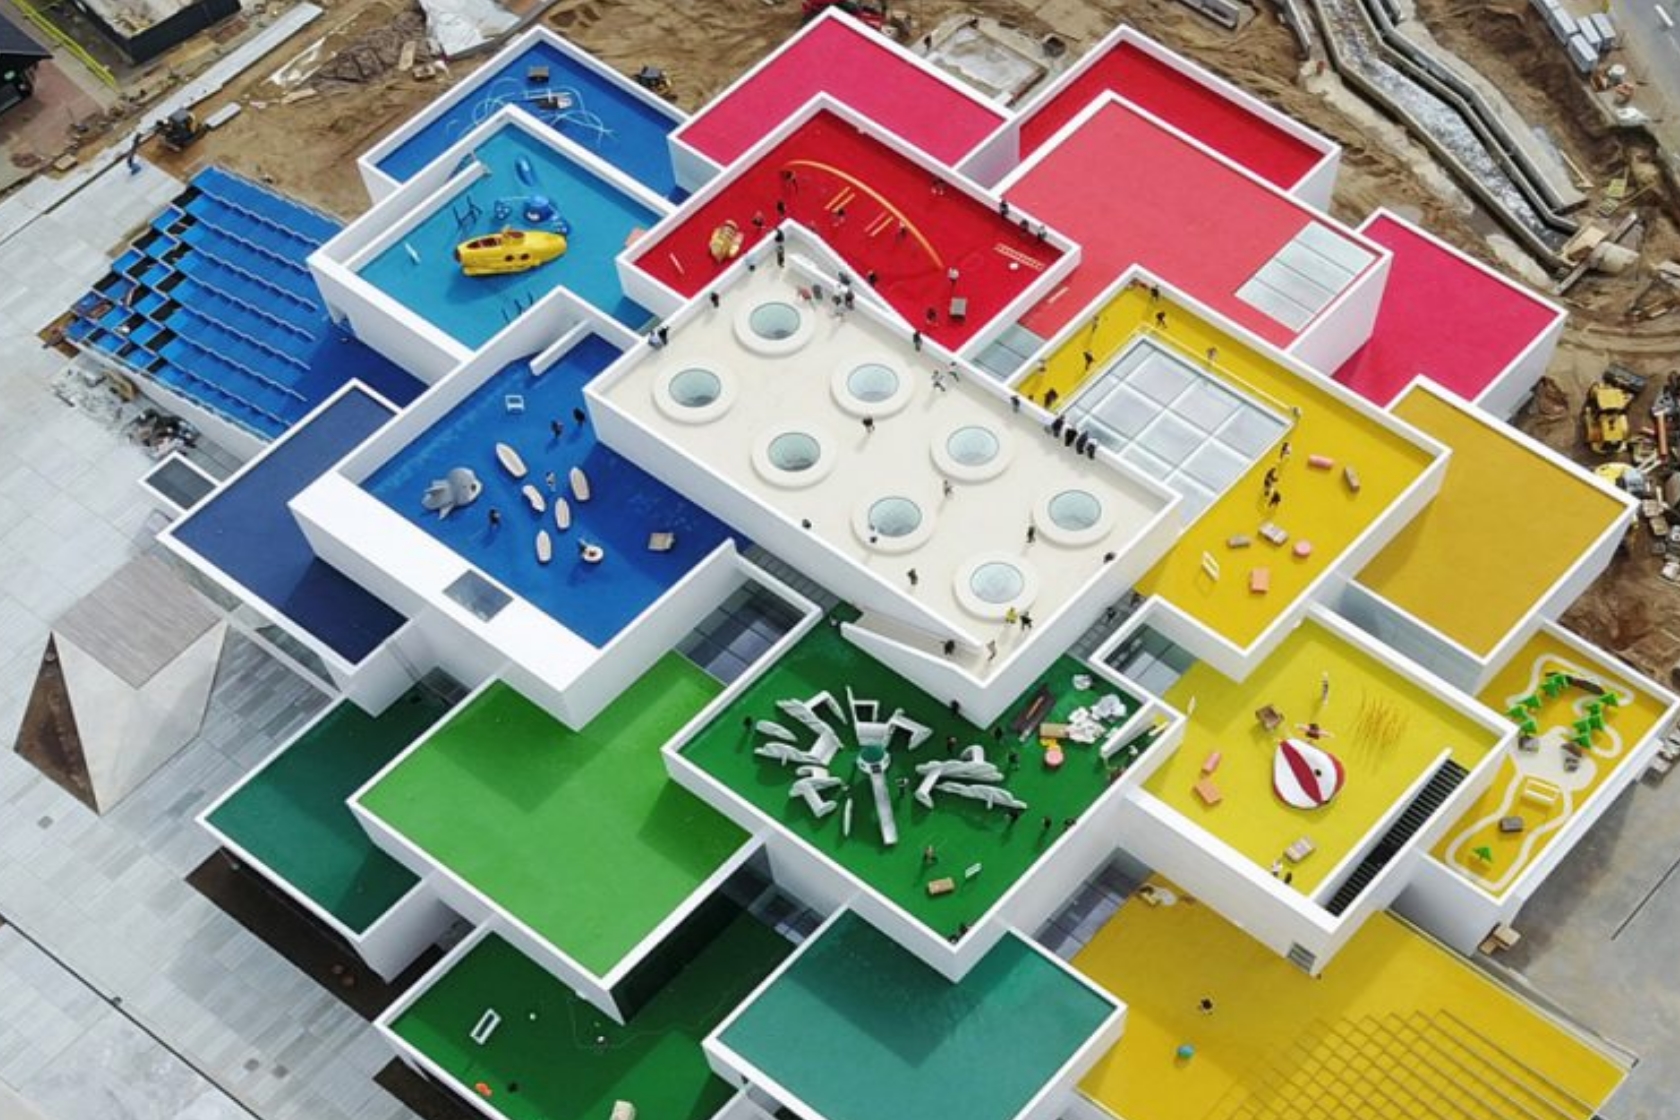 13-the-new-lego-house-finally-reveals-an-old-secret-1024x576